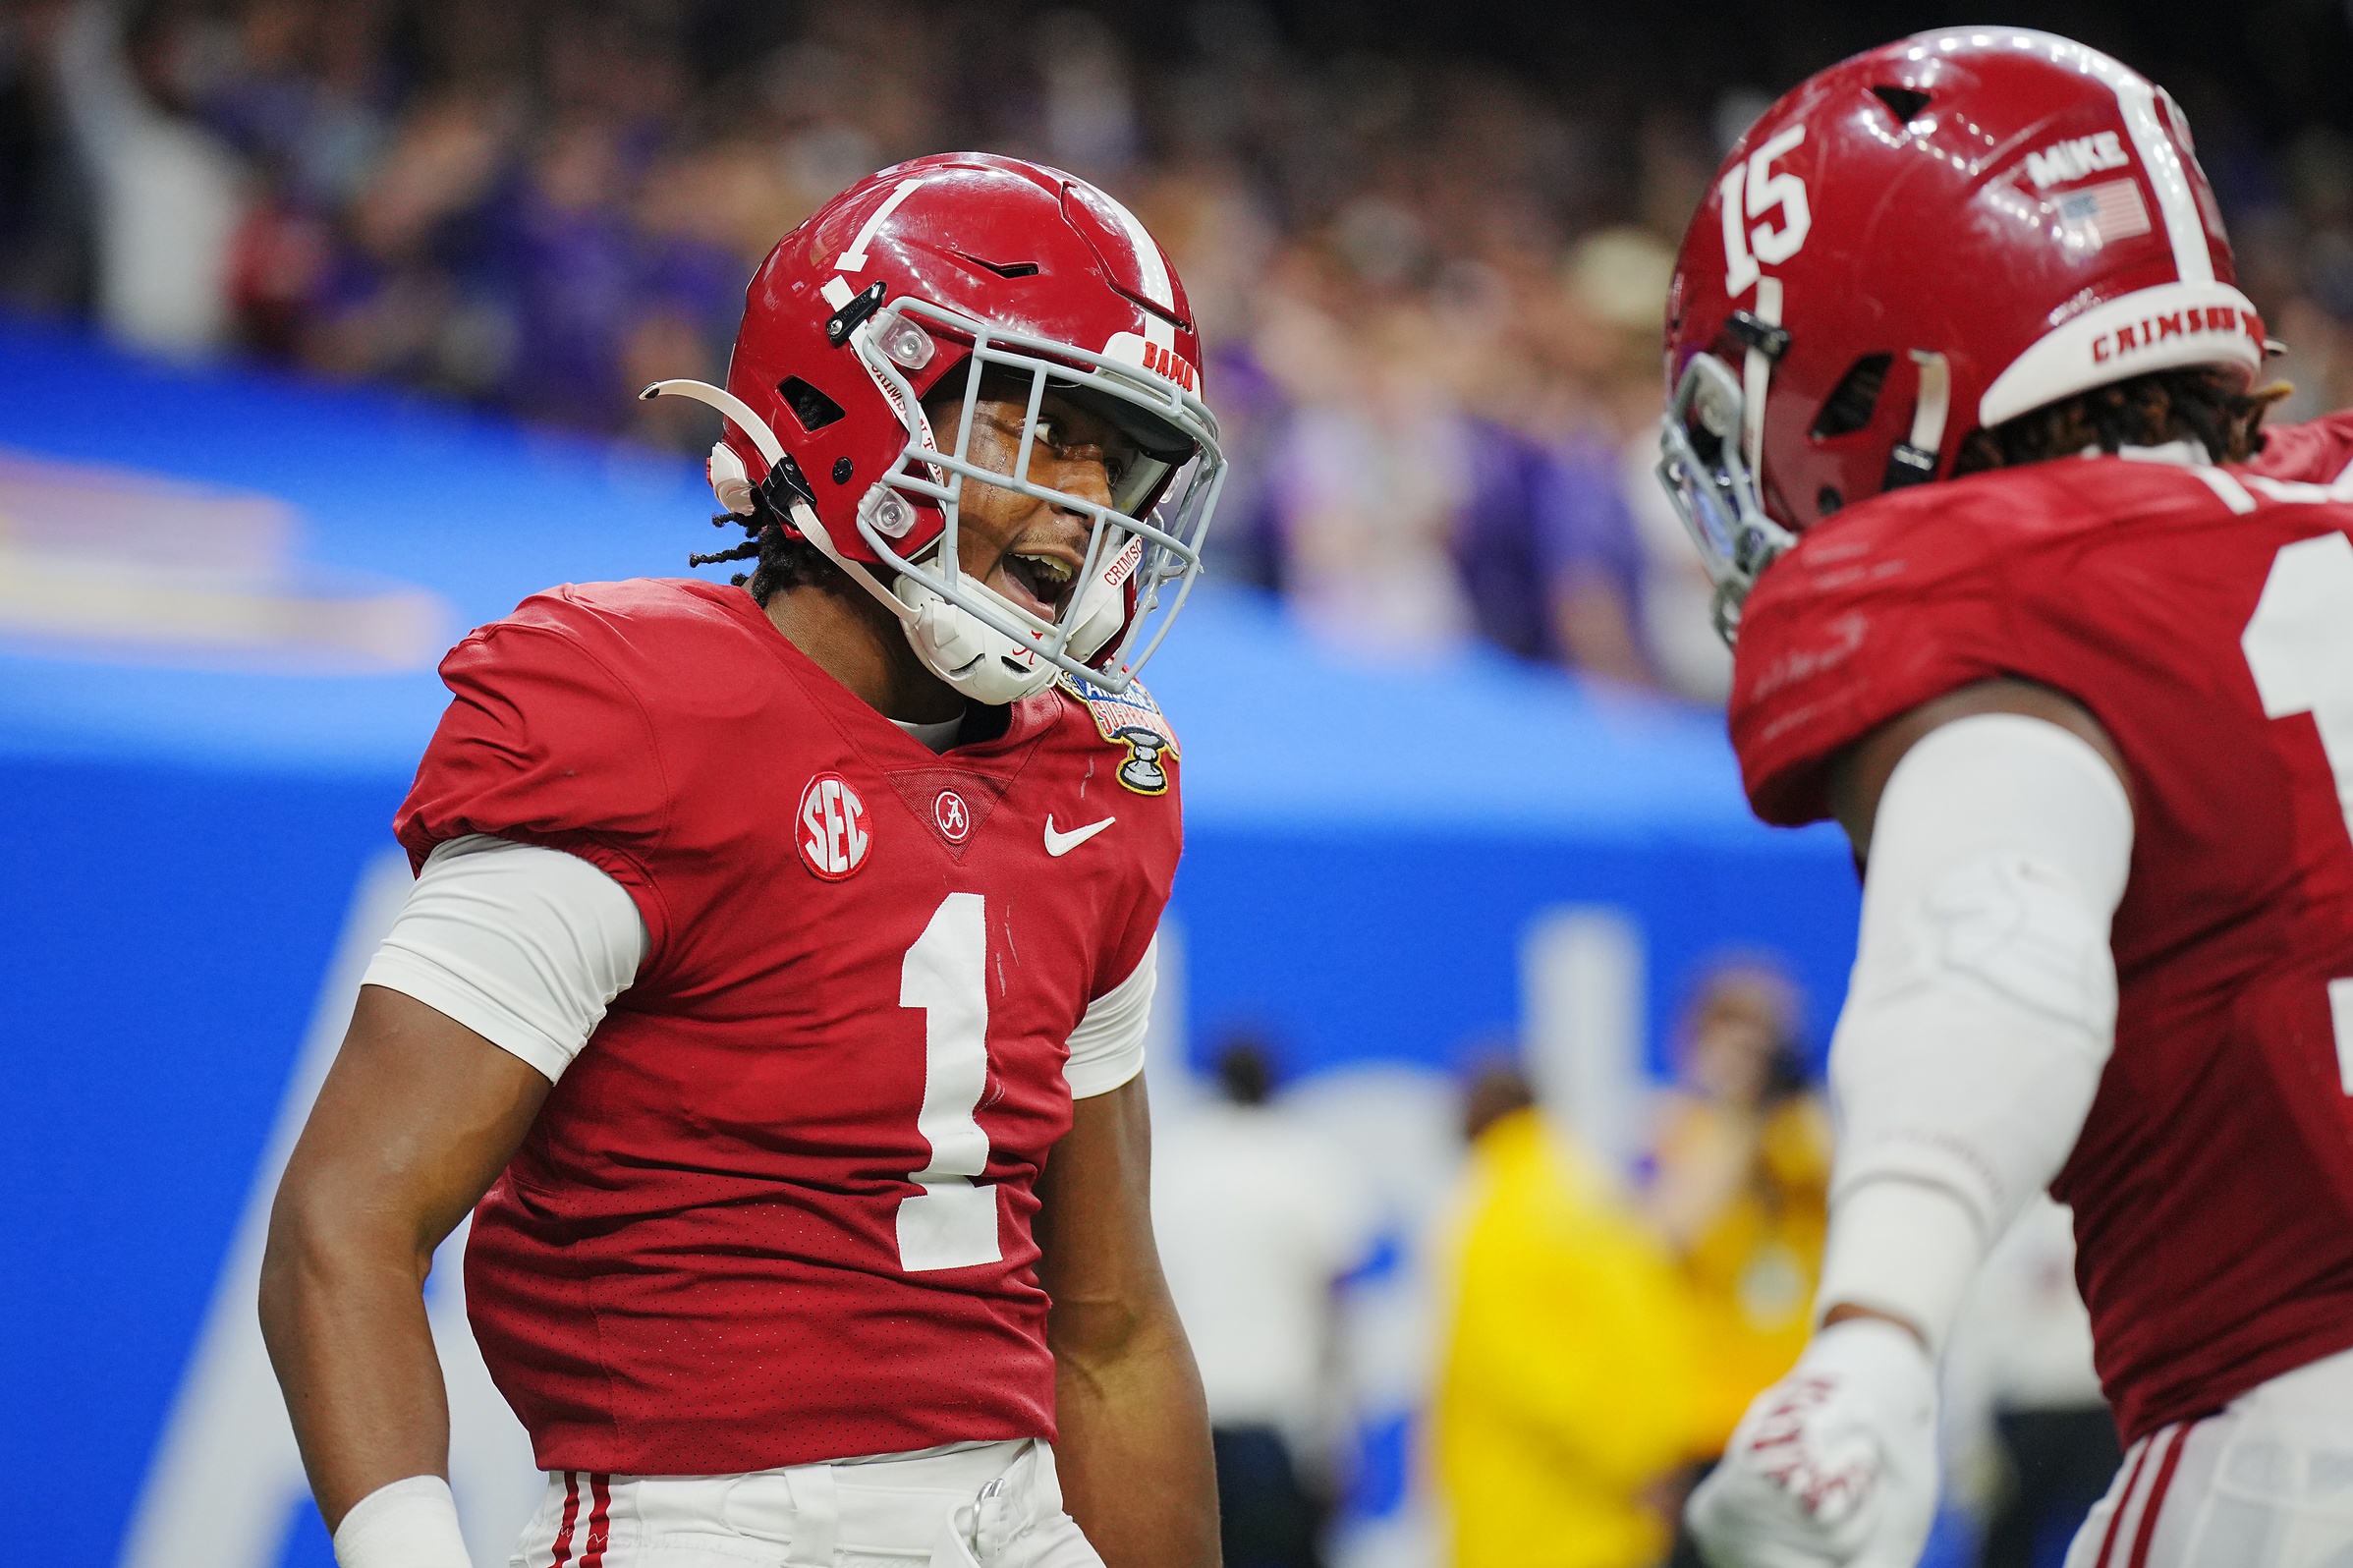 2024 NFL Mock Draft - by Mello - The Draft Scout